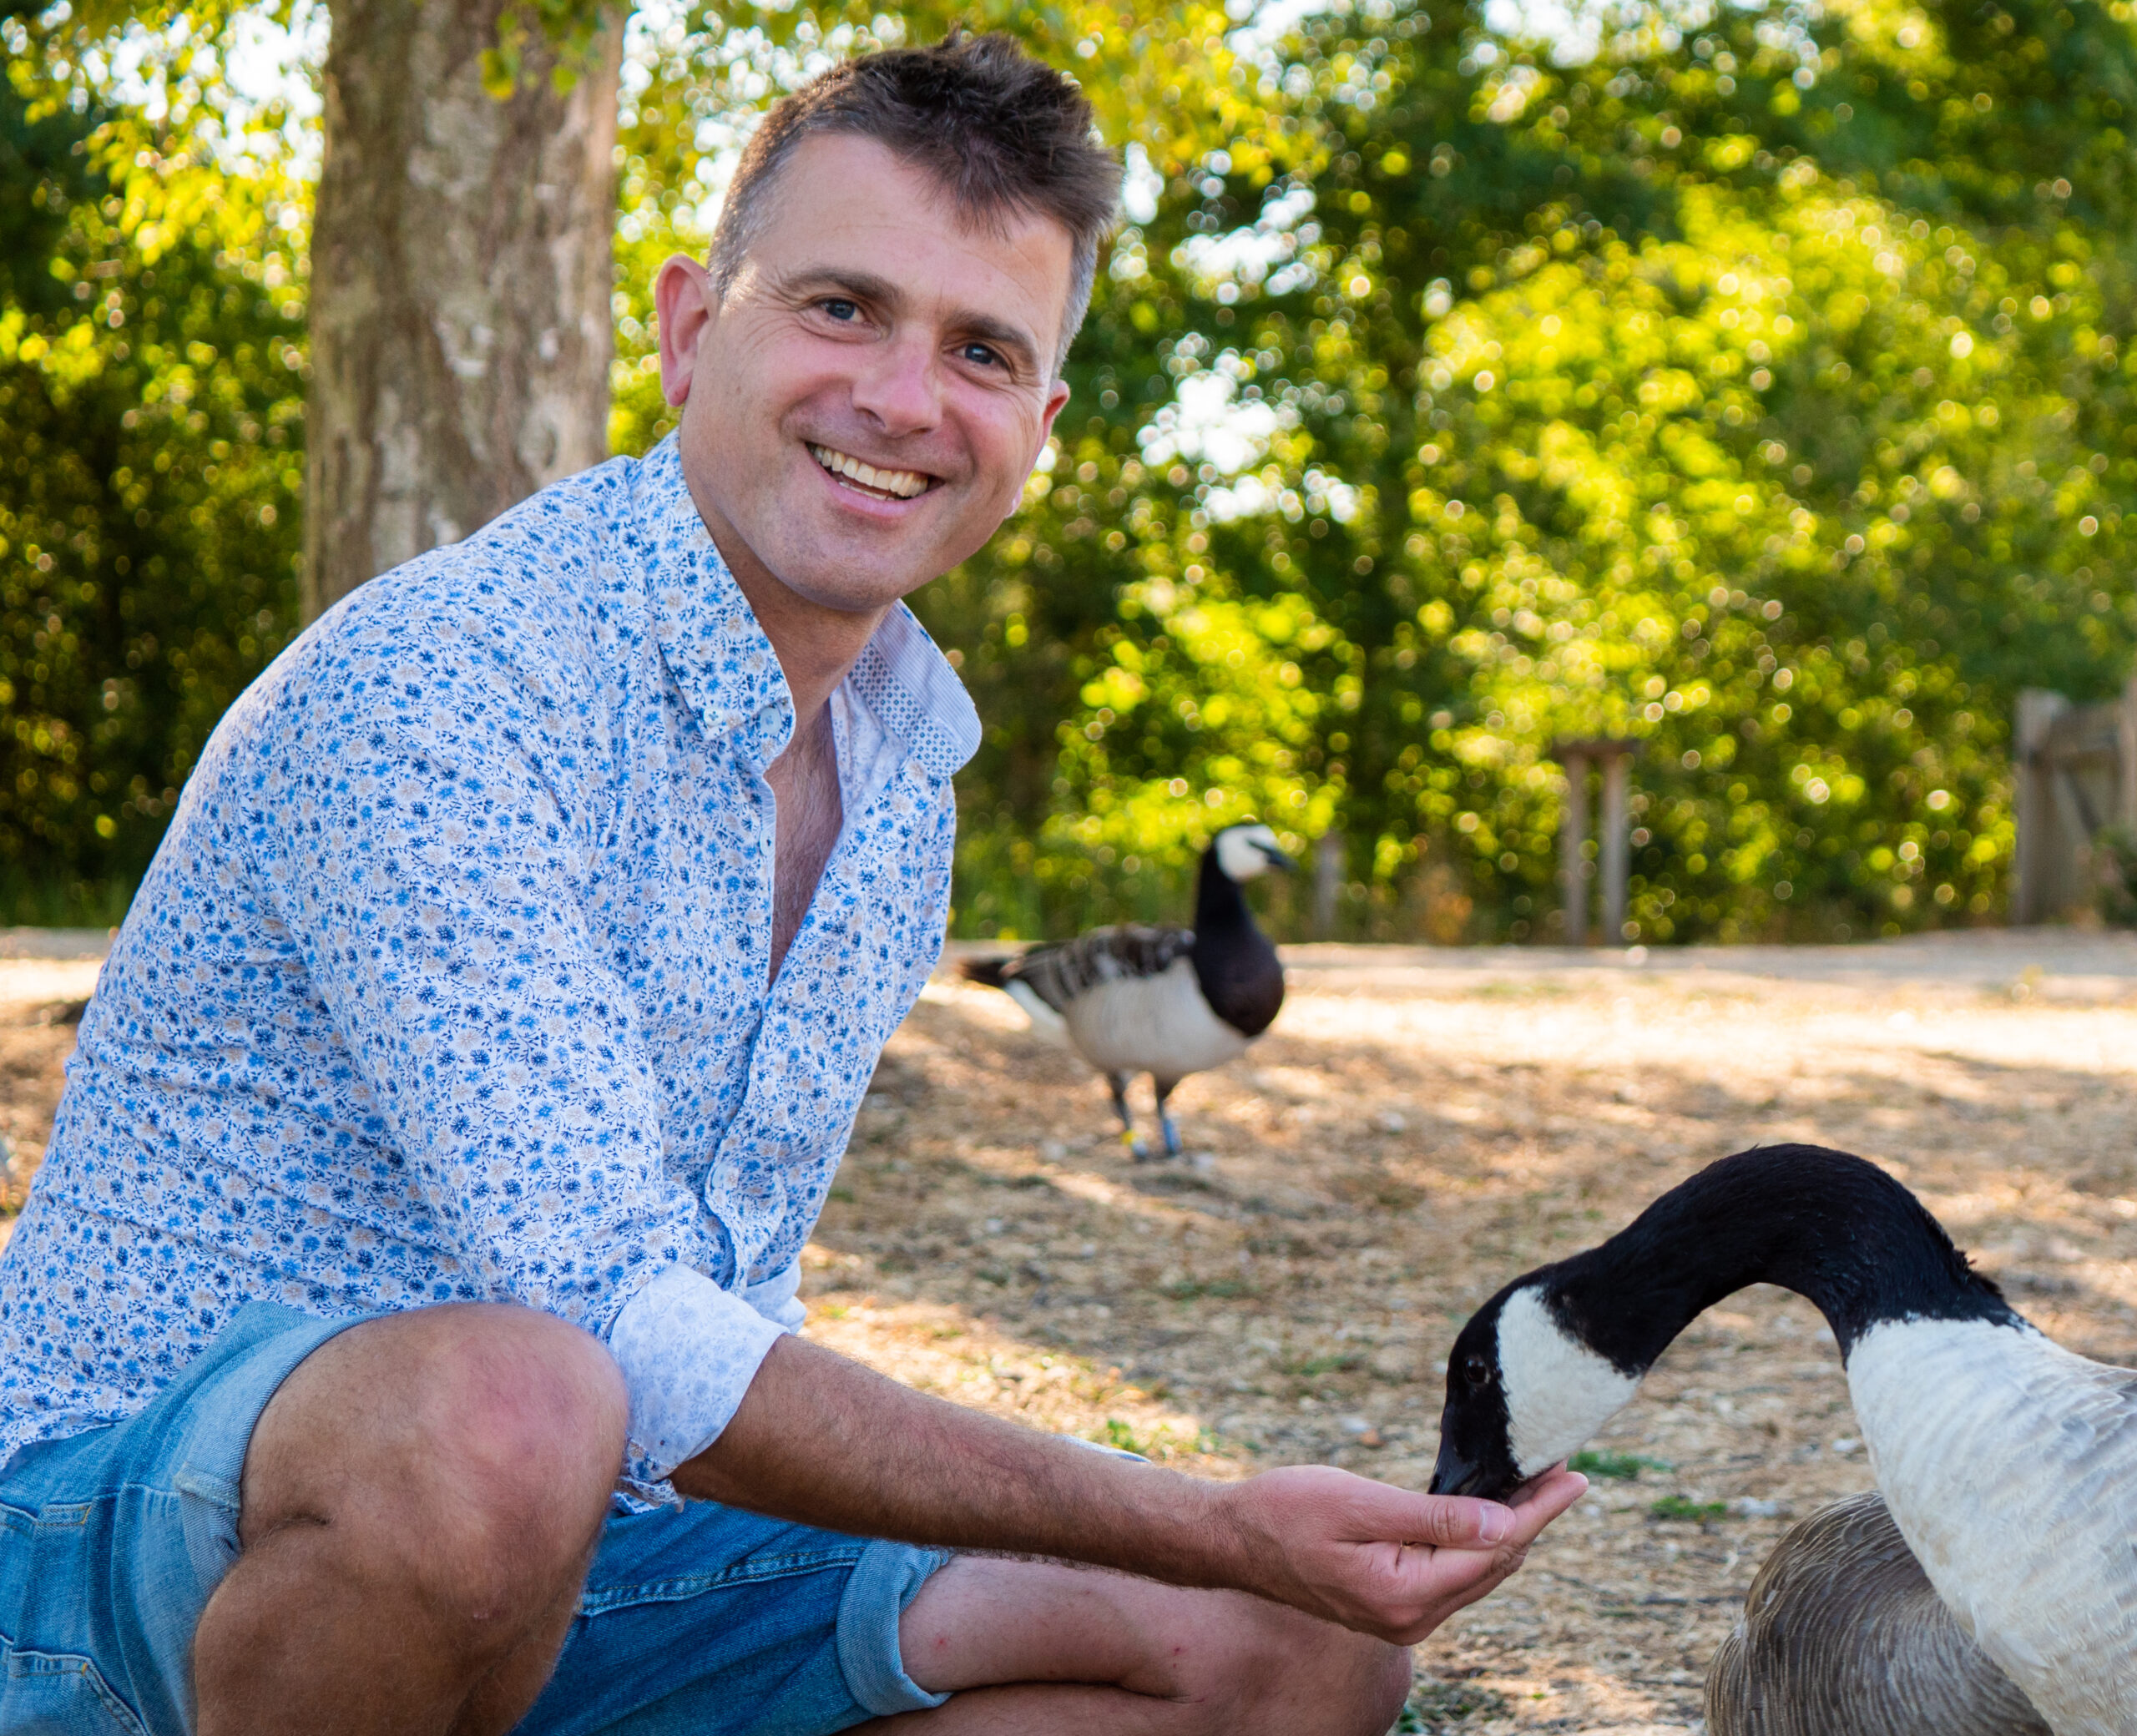 A caucasian male smiling and feeding a Canada goose